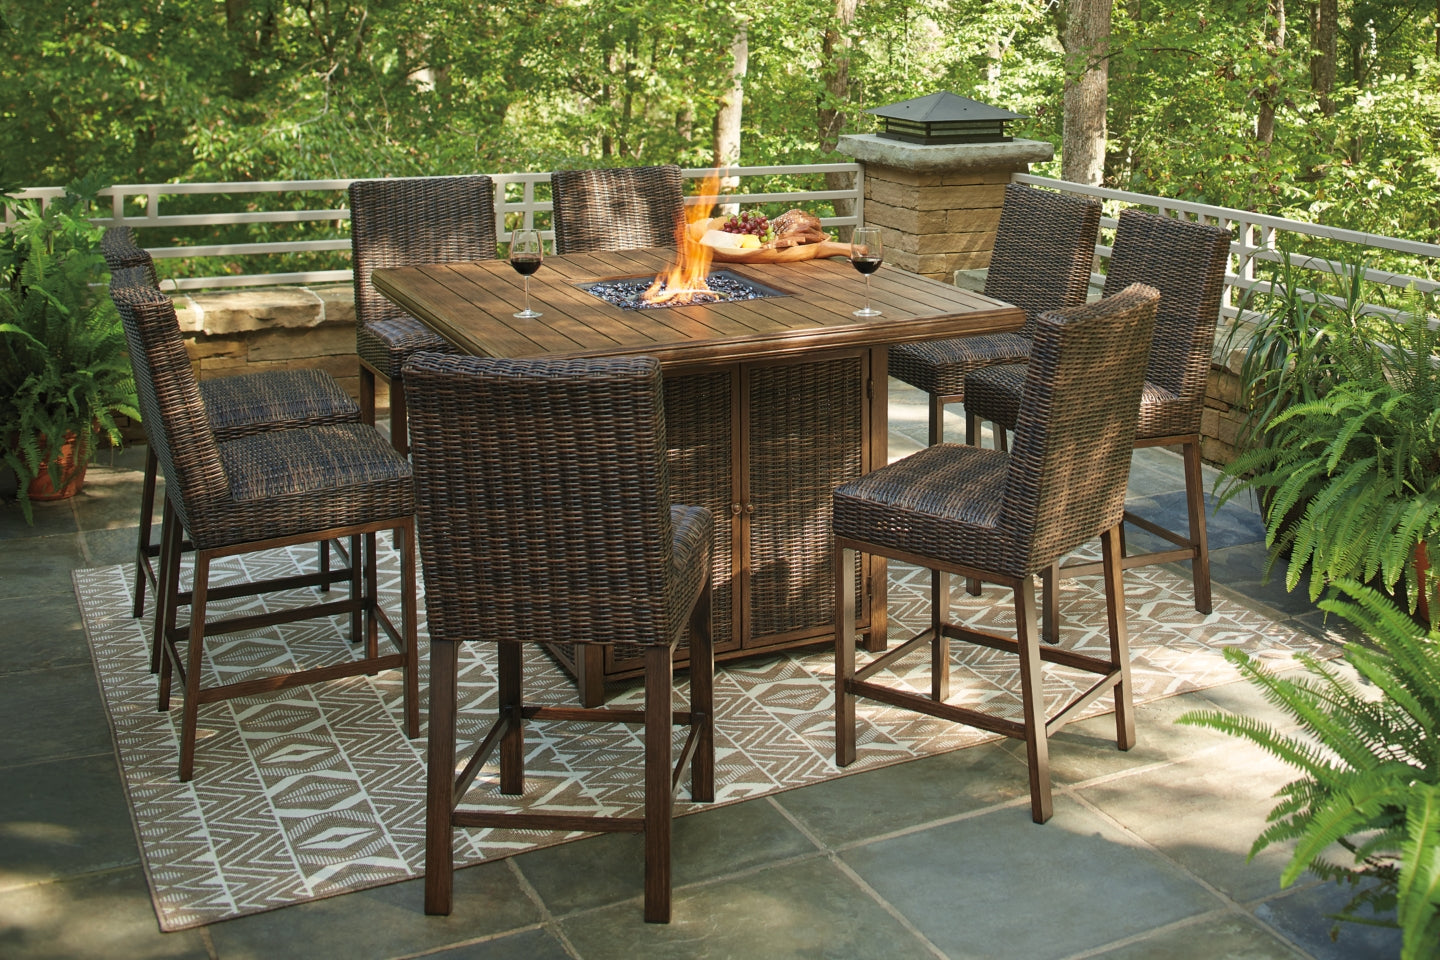 Paradise Trail Outdoor Counter Height Dining Table with 6 Barstools